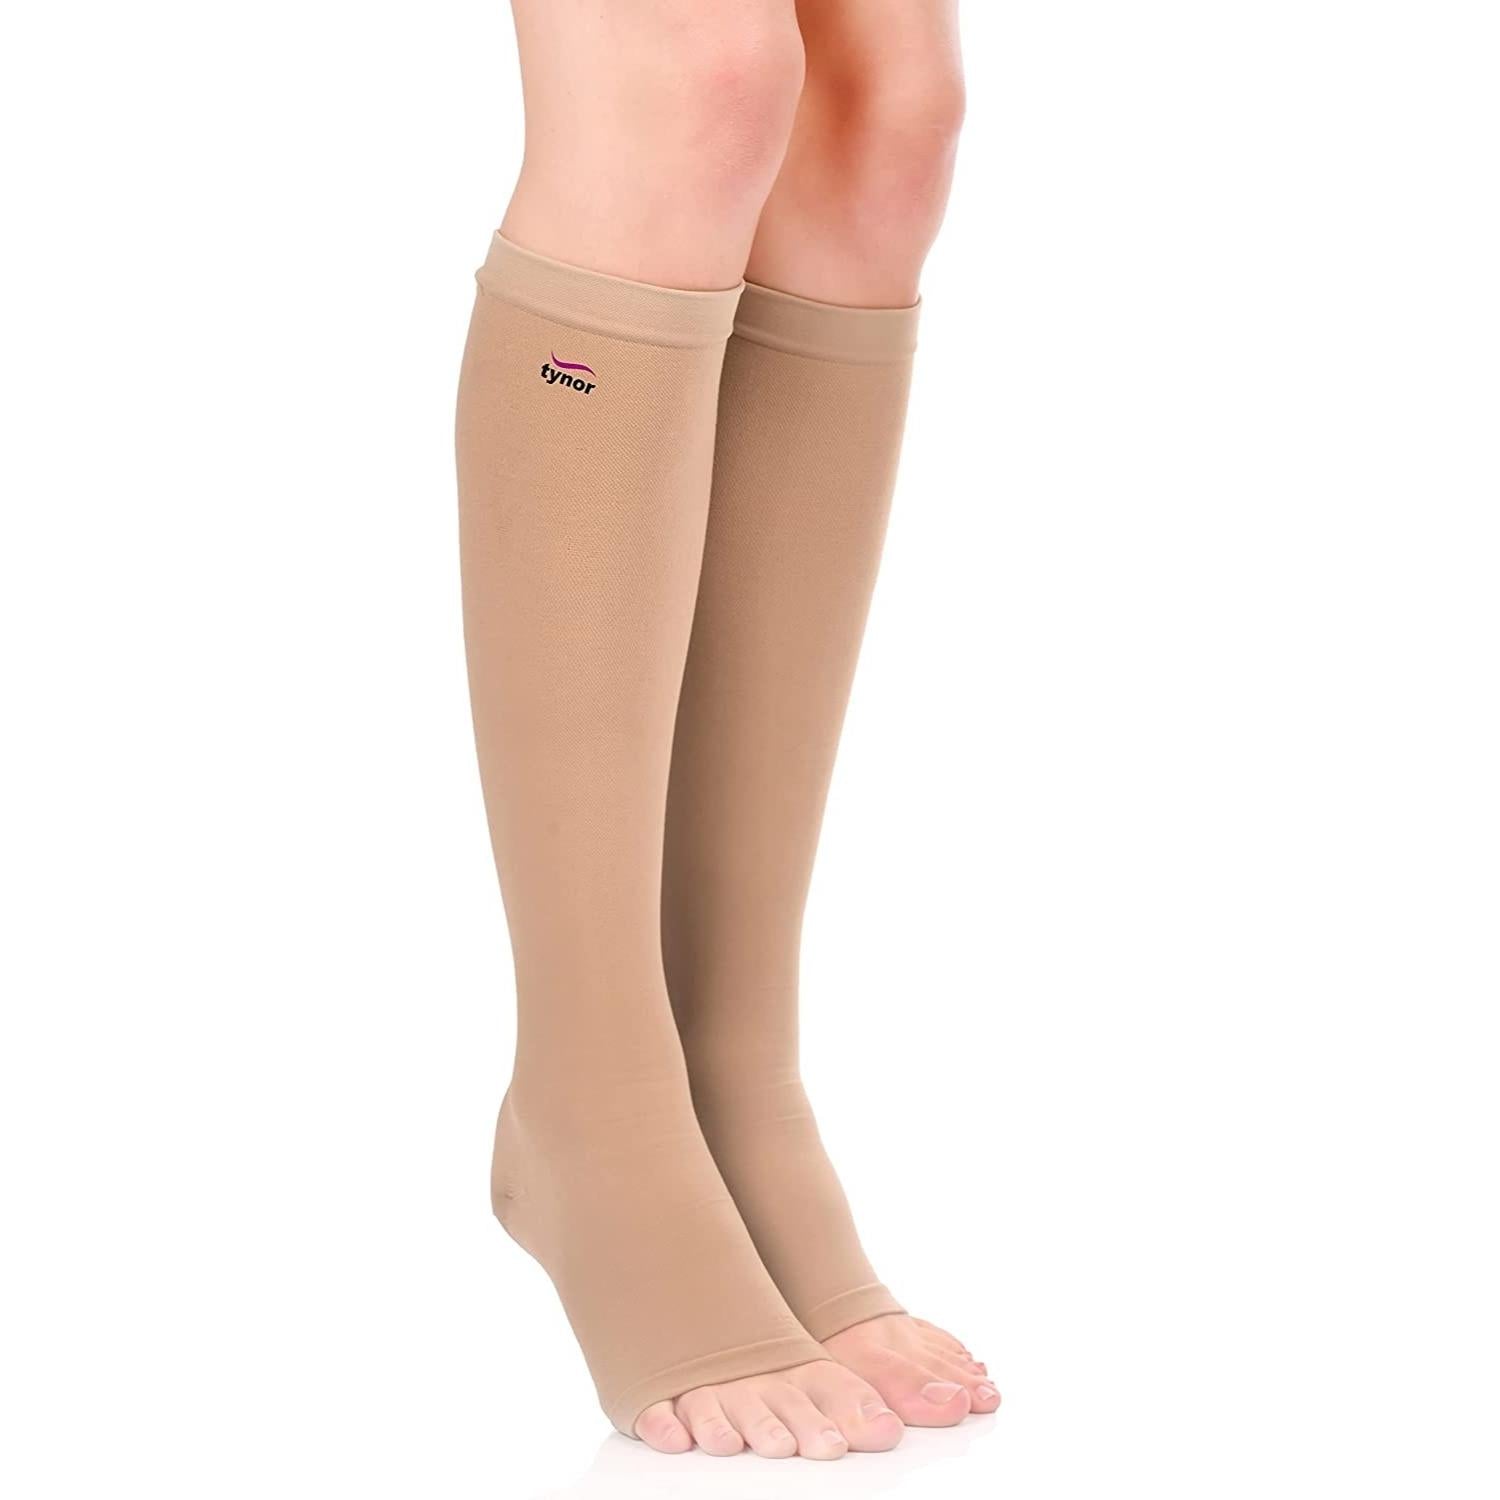 Cotton open-toe medical compression tights - Class 2 (23-32 mmHg)